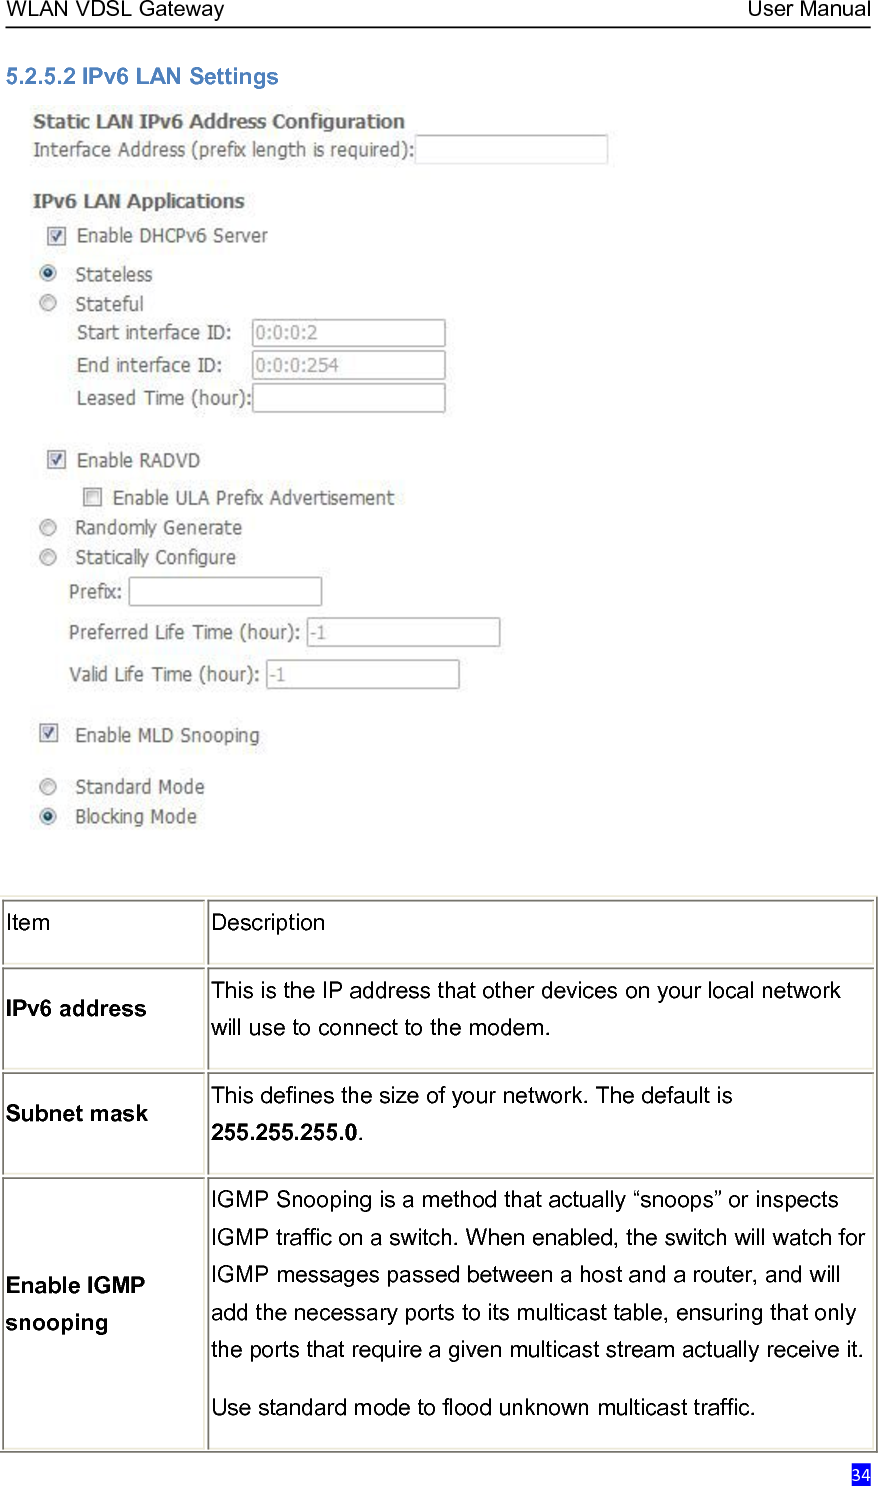 WLAN VDSL Gateway User Manual345.2.5.2 IPv6 LAN SettingsItemDescriptionIPv6 addressThis is the IP address that other devices on your local networkwill use to connect to the modem.Subnet maskThis defines the size of your network. The default is255.255.255.0.Enable IGMPsnoopingIGMP Snooping is a method that actually “snoops” or inspectsIGMP traffic on a switch. When enabled, the switch will watch forIGMP messages passed between a host and a router, and willadd the necessary ports to its multicast table, ensuring that onlythe ports that require a given multicast stream actually receive it.Use standard mode to flood unknown multicast traffic.